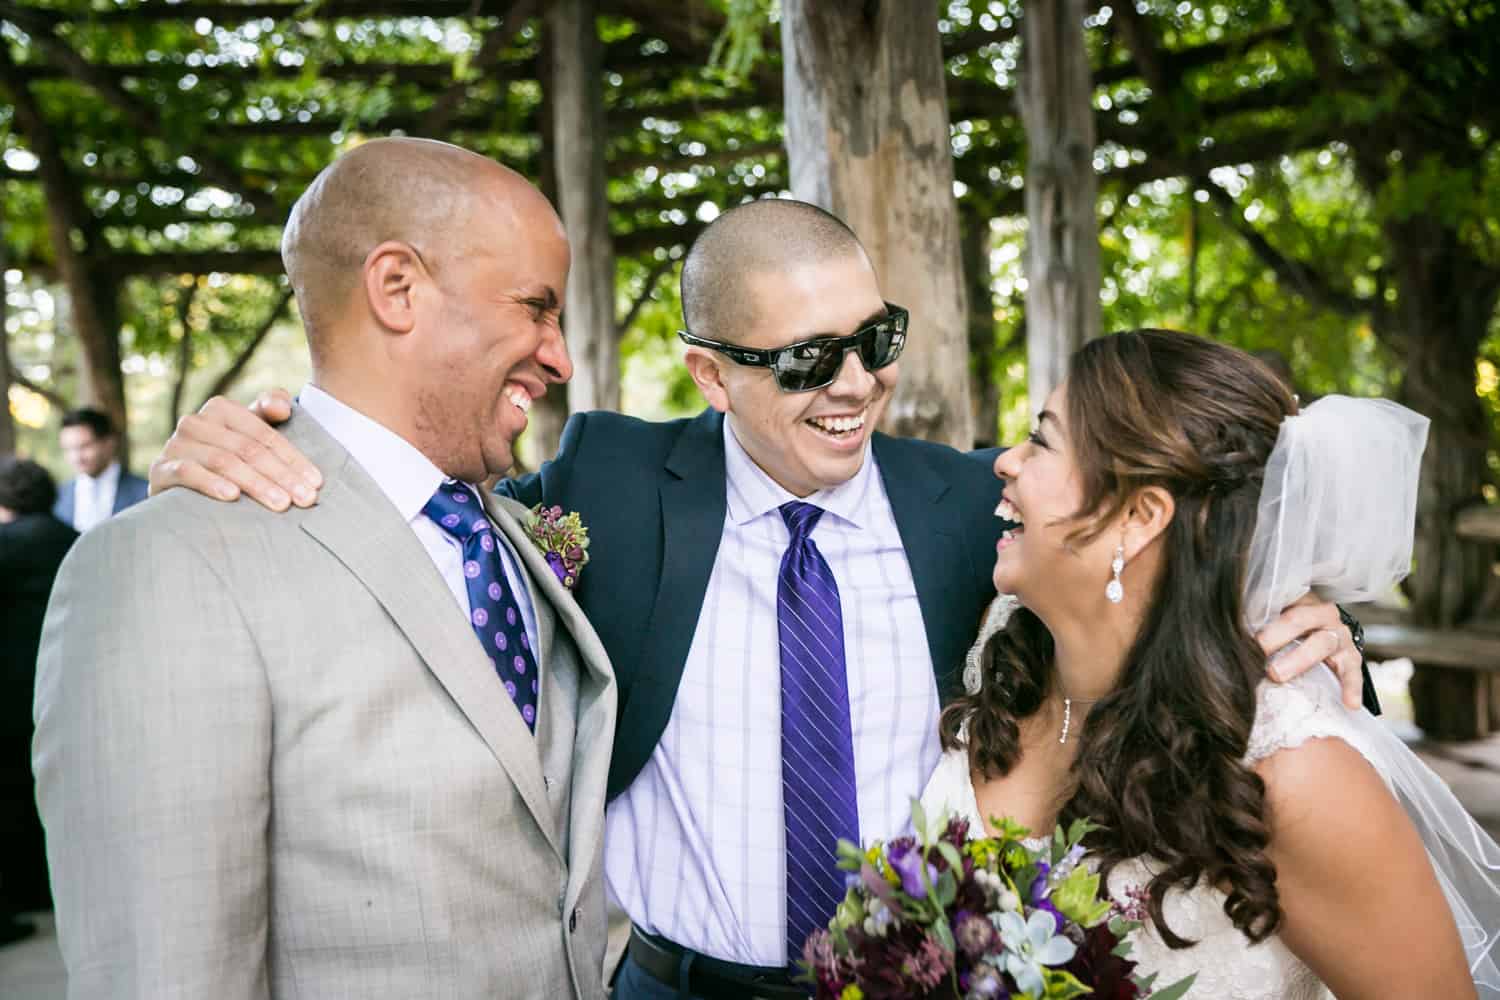 Bride and groom with male guest wearing sunglasses